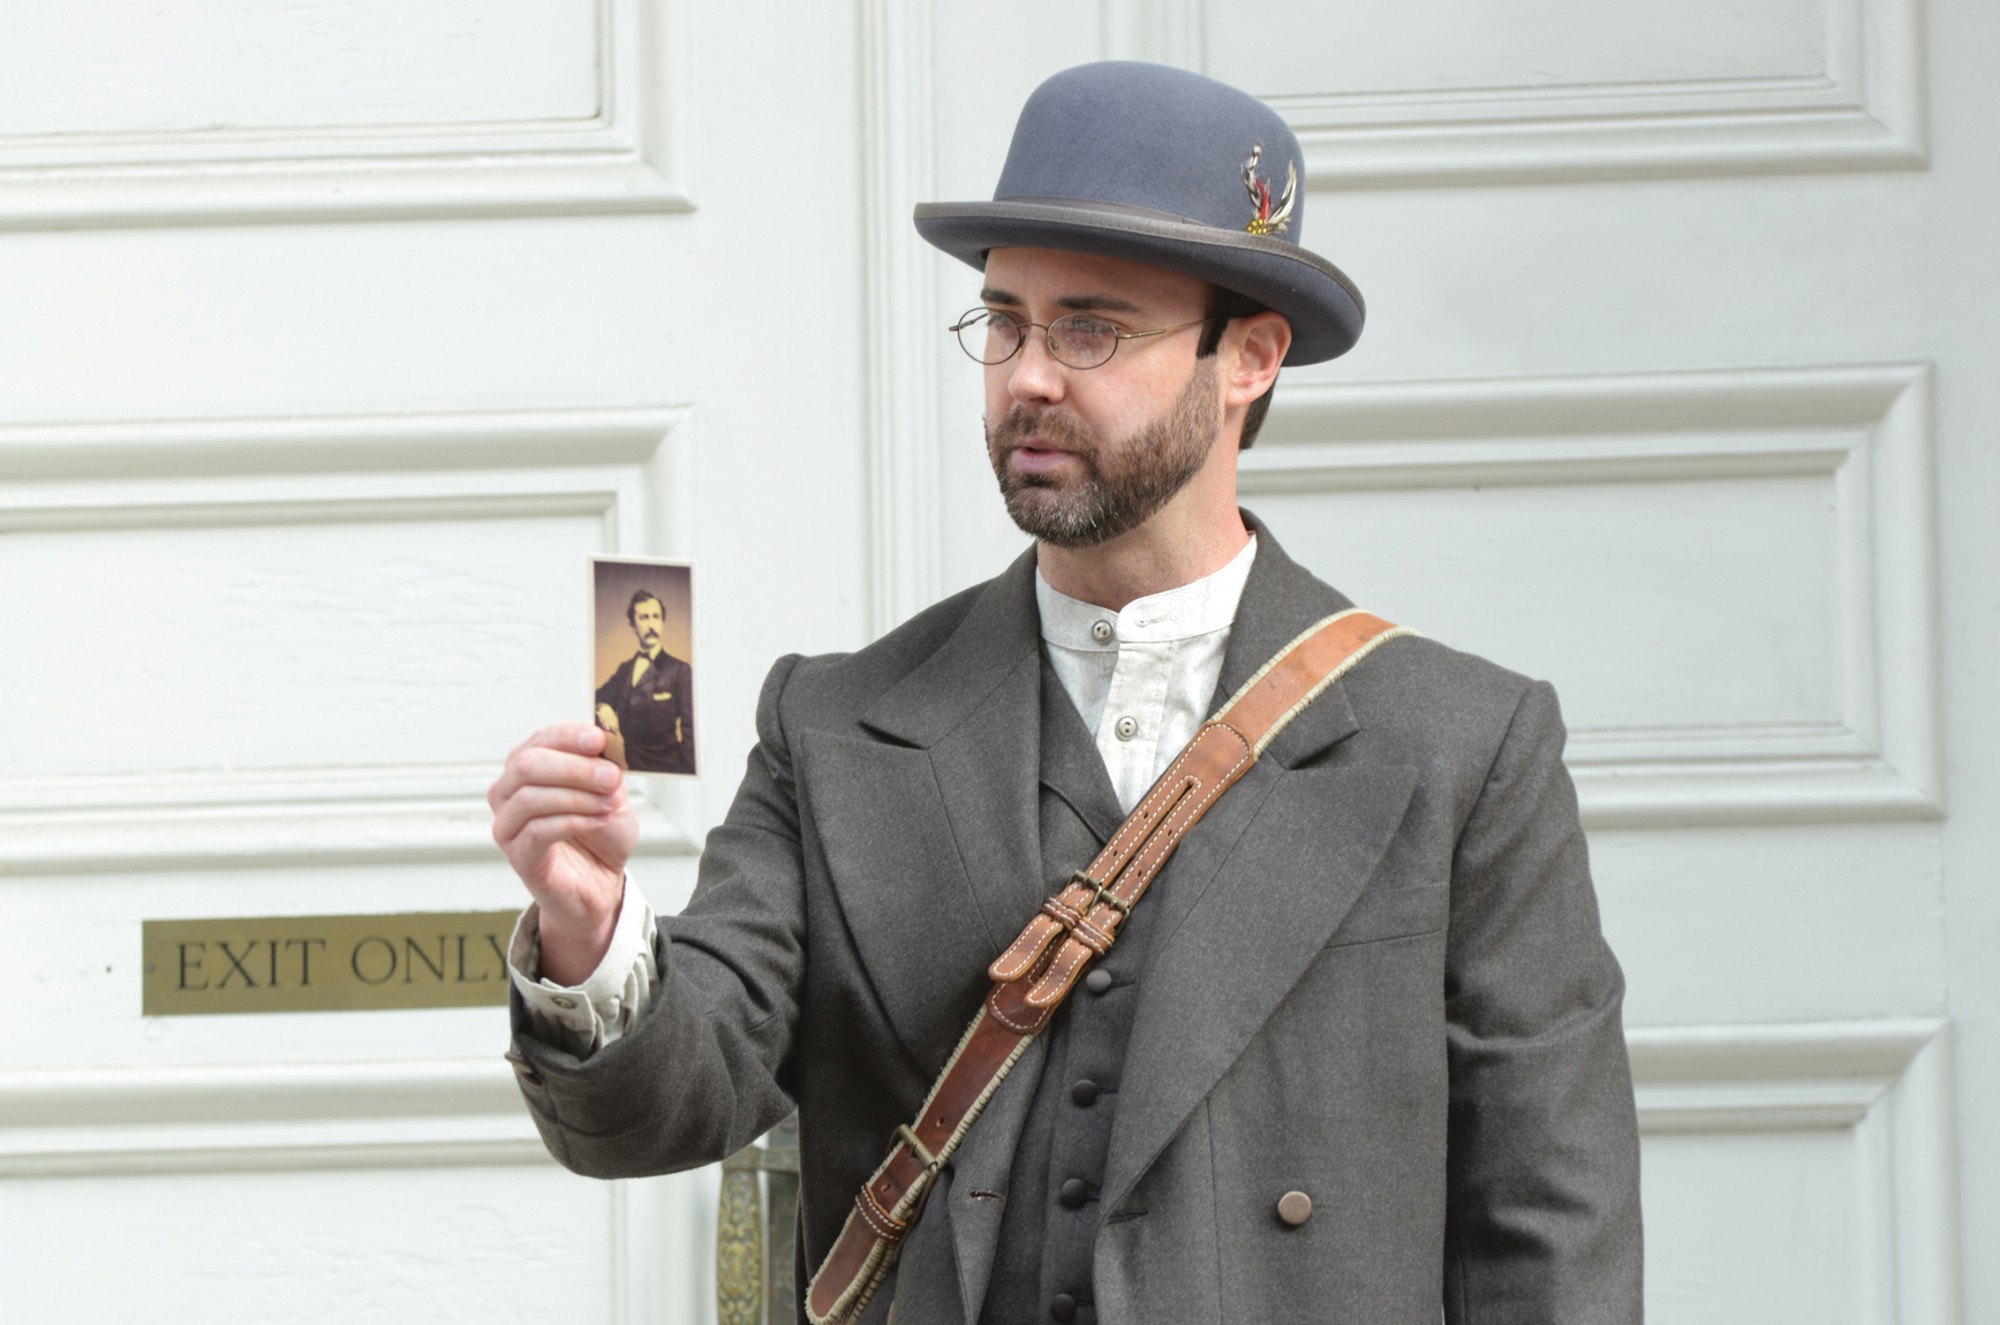 Actor William Diggle, dressed as Detective James McDevitt, holds a photo of assassin John Wilkes Booth as he leads a tour outside of Ford's Theatre.